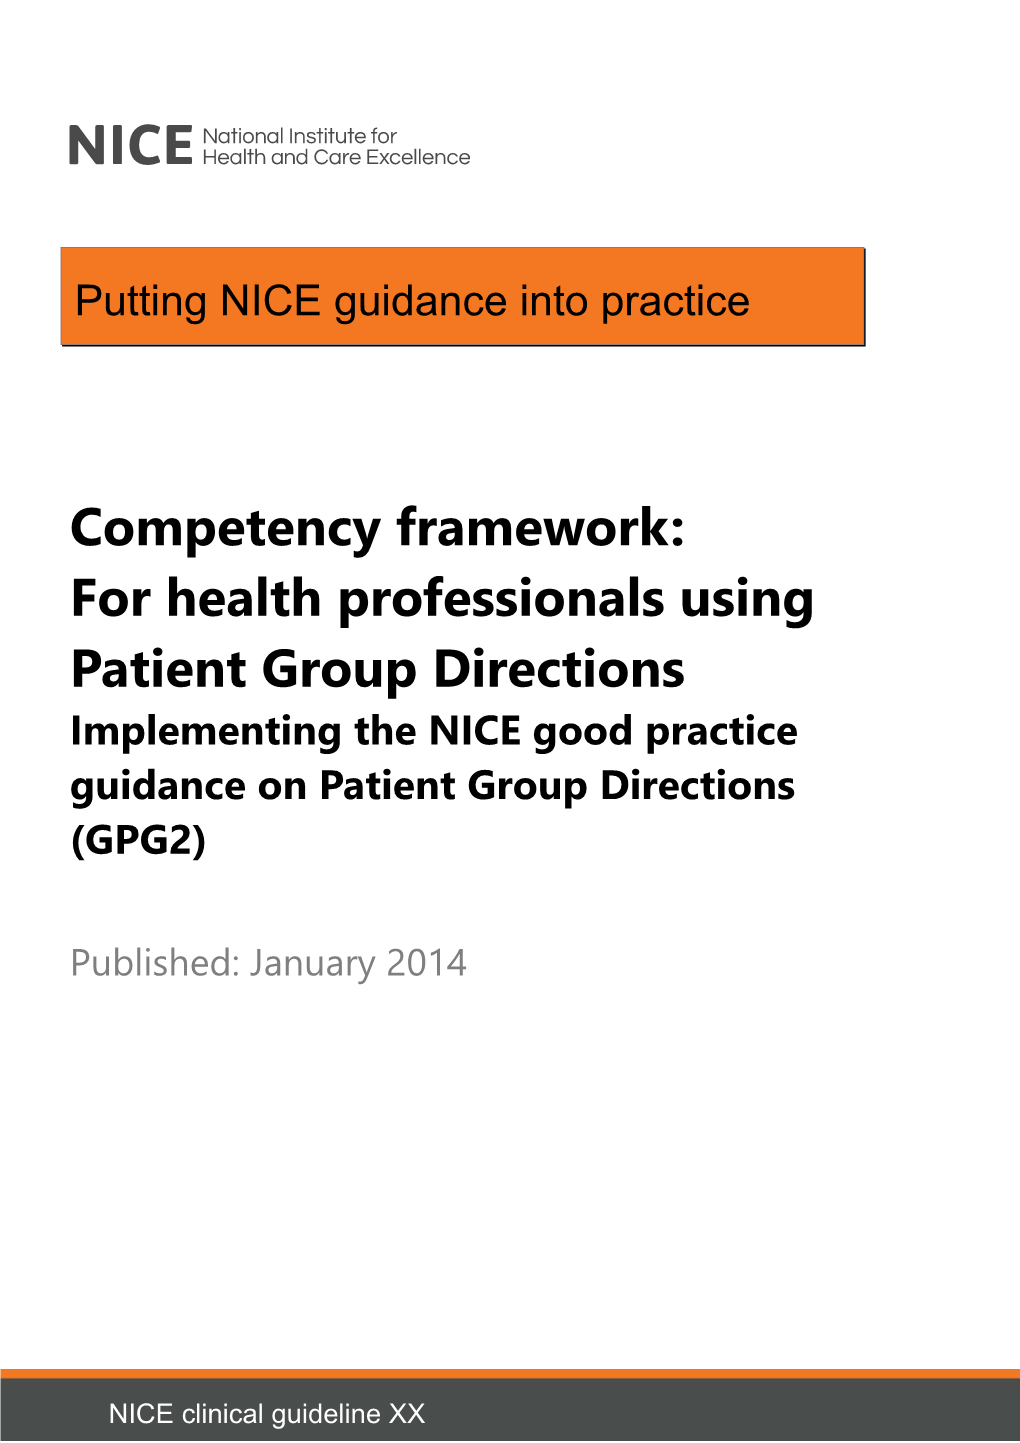 For Health Professionals Using Patient Group Directions